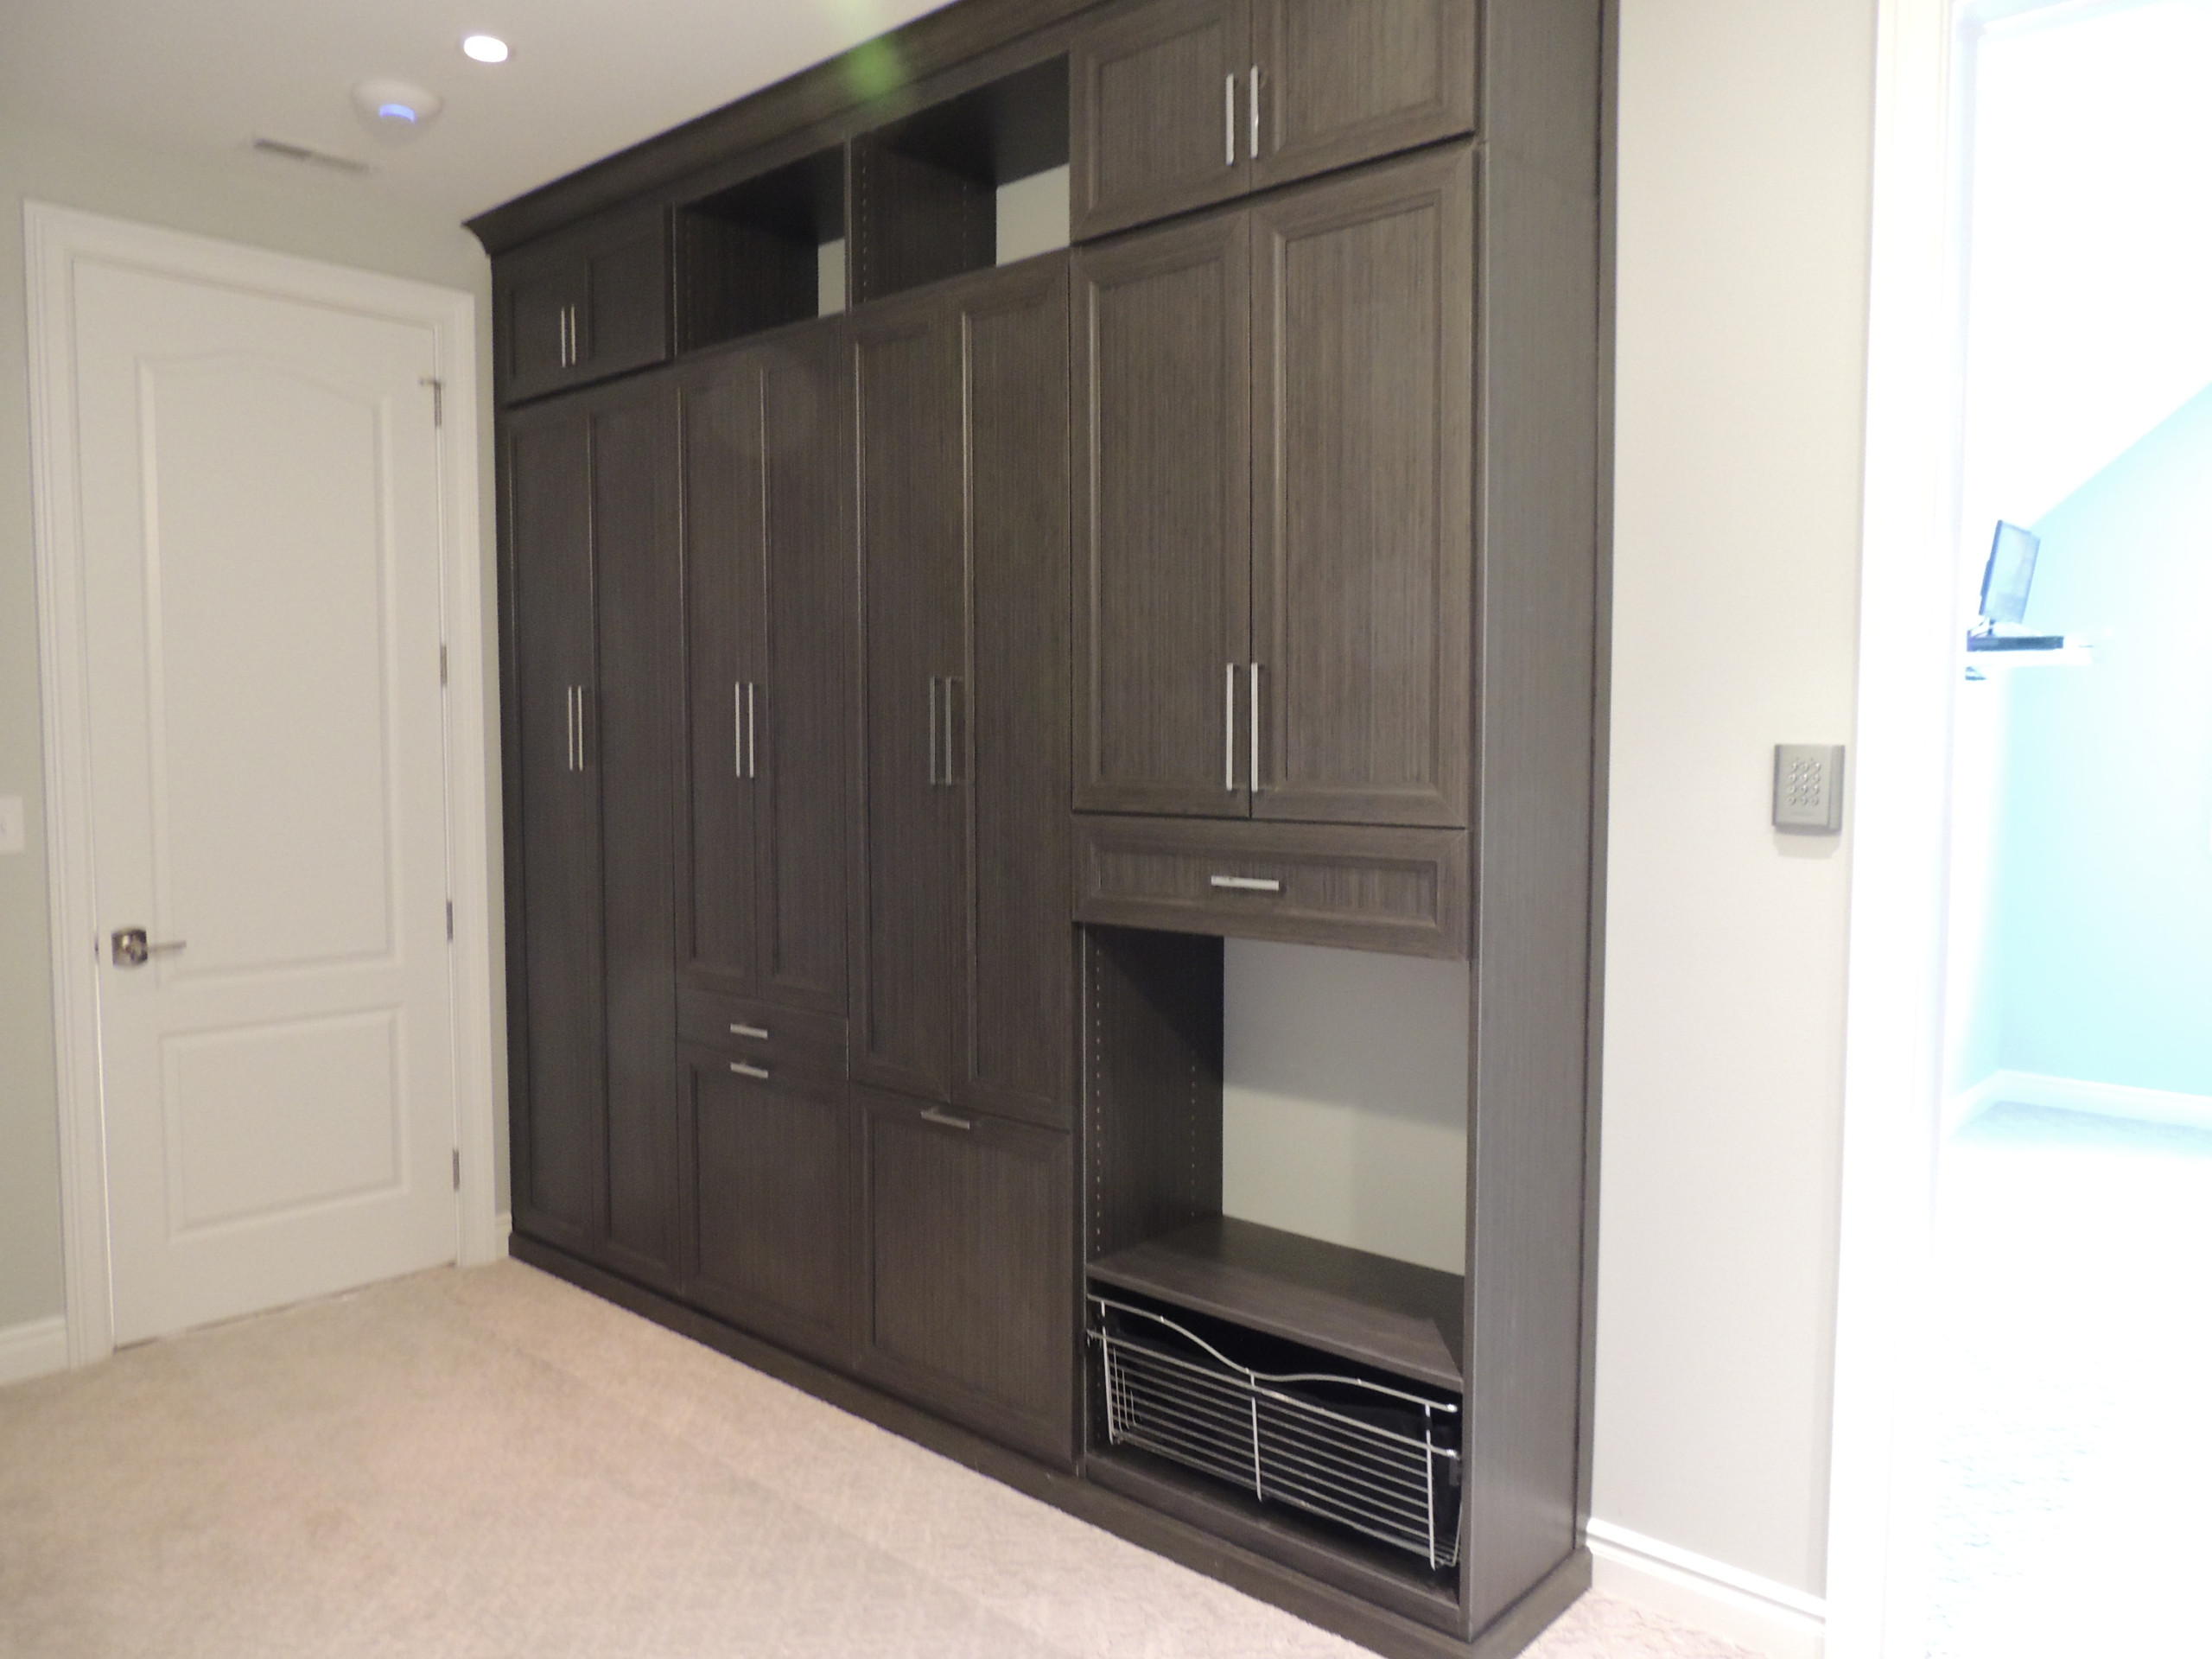 Shaker door cabinets for hamper and ironing board storage.